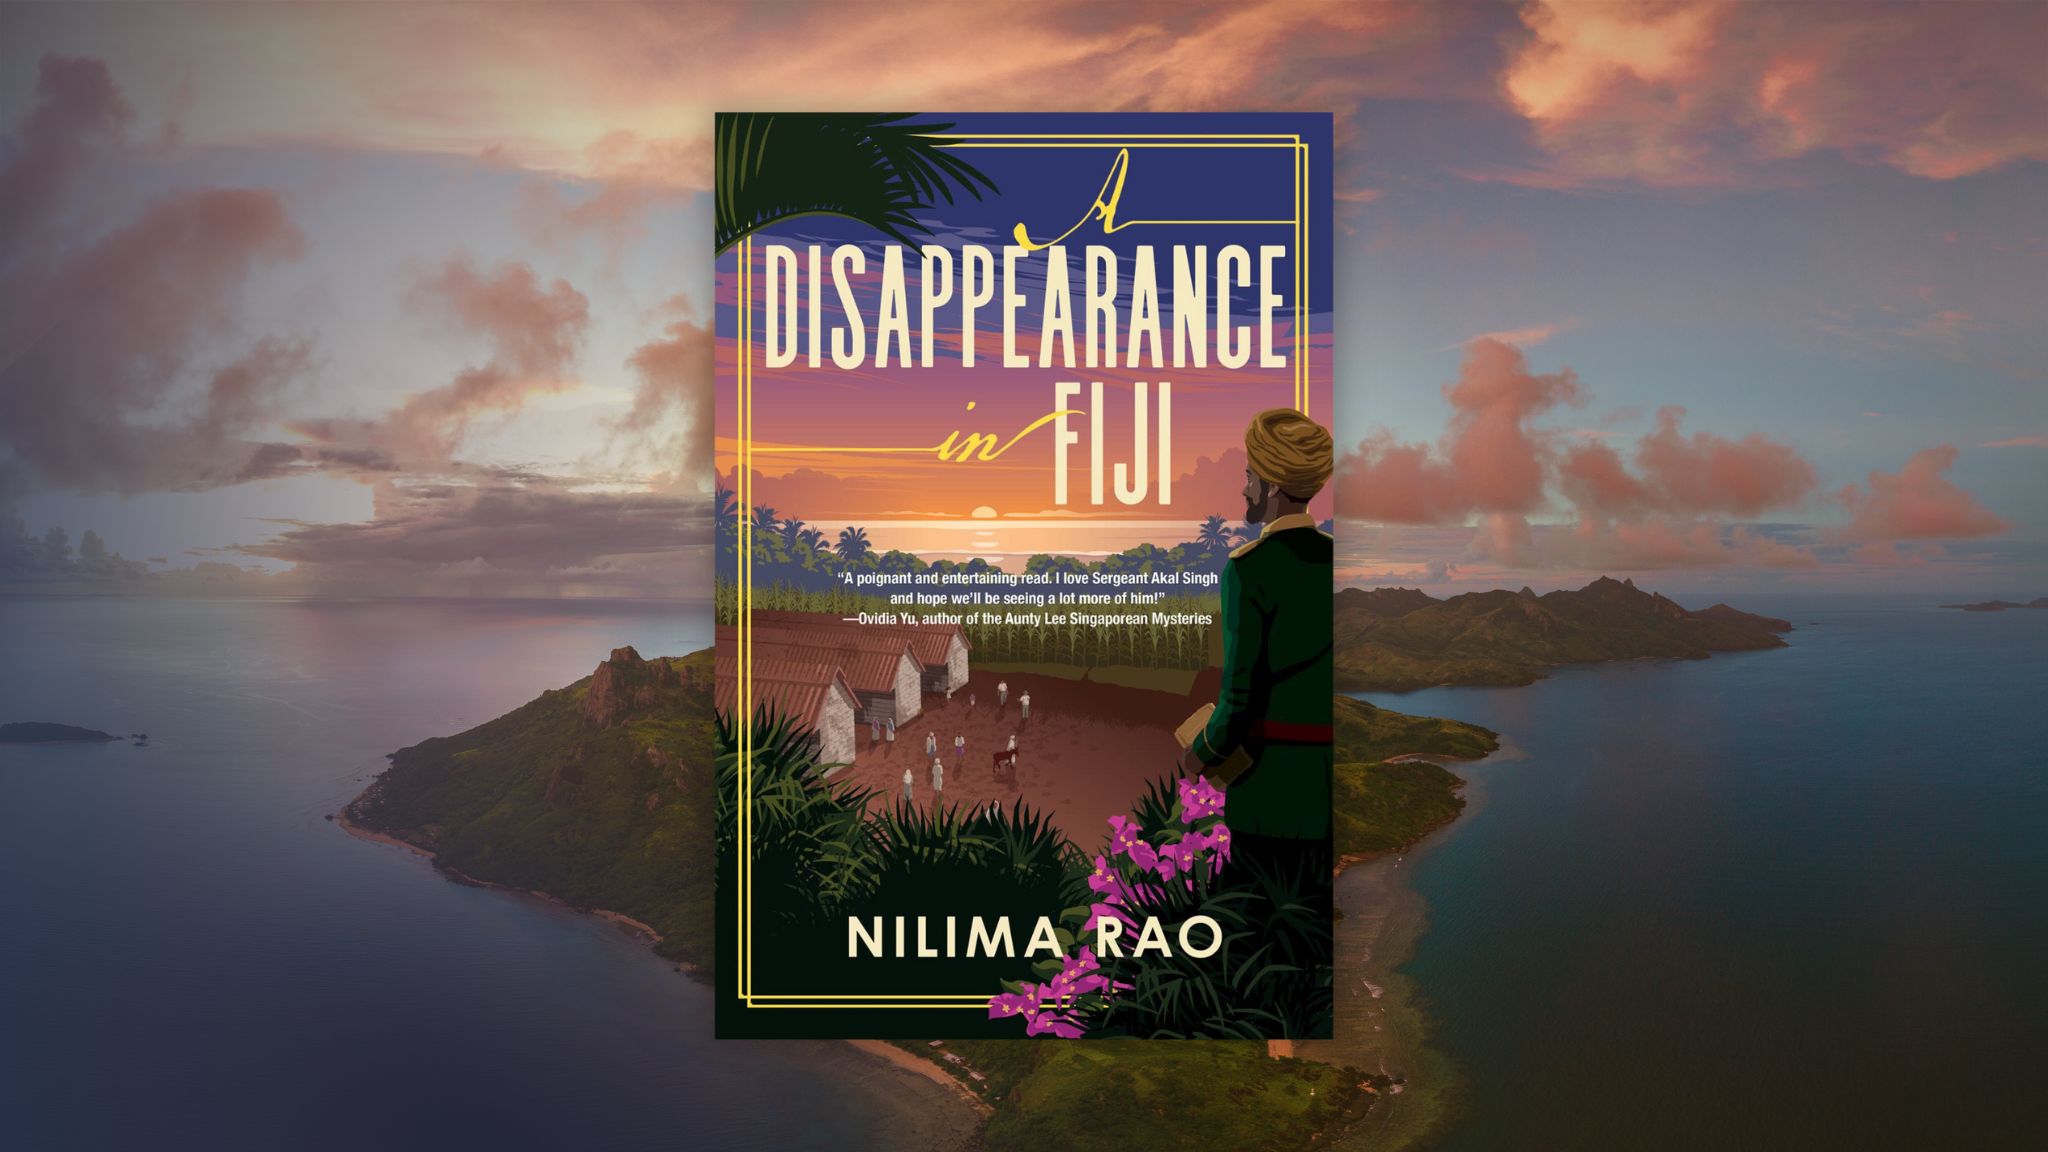 A Disappearance in Fiji by Nilima Rao